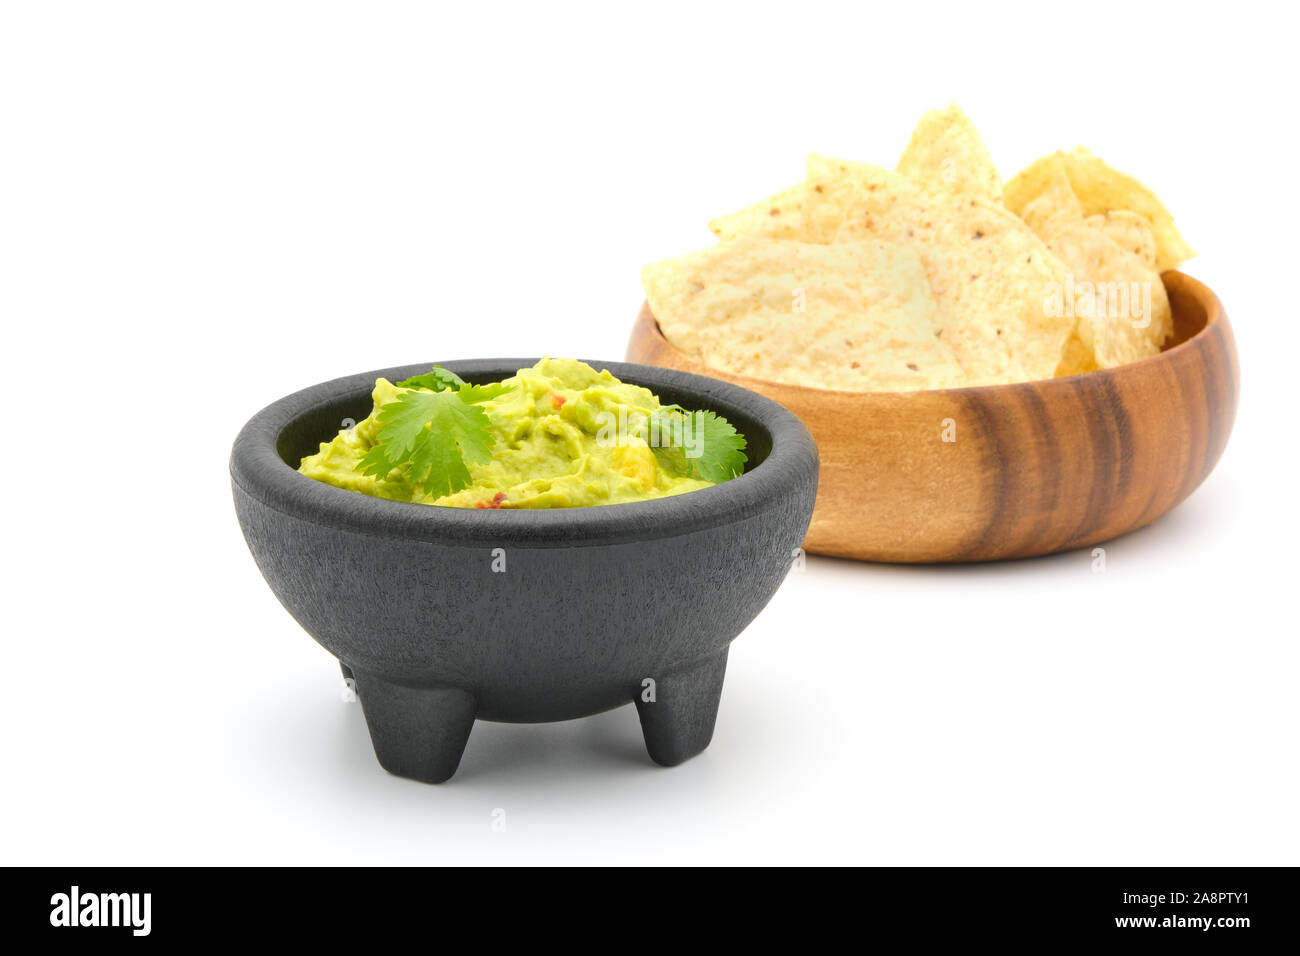 Bowl of fresh homemade guacamole with crispy tortilla chips. Stock Photo